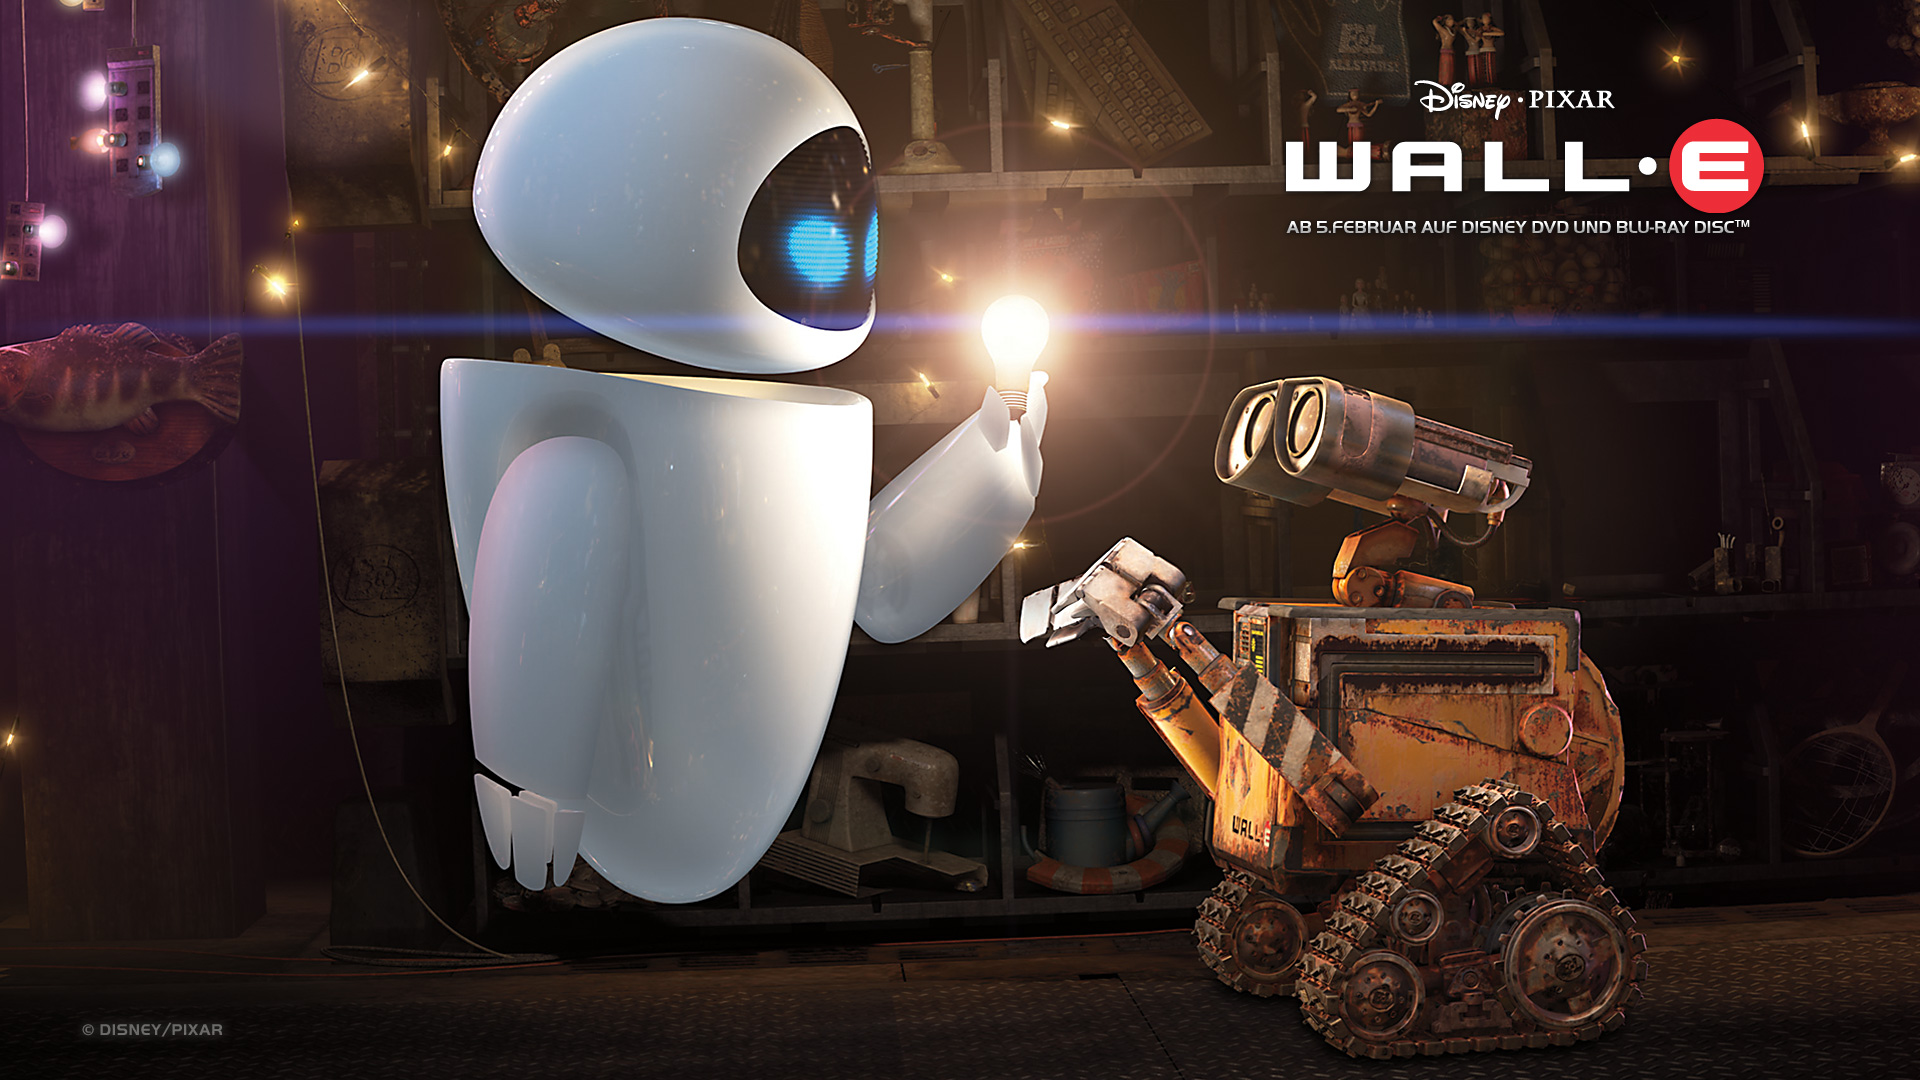 Movie Wallpaper Wall E HD 1080p German Bill Pictures And